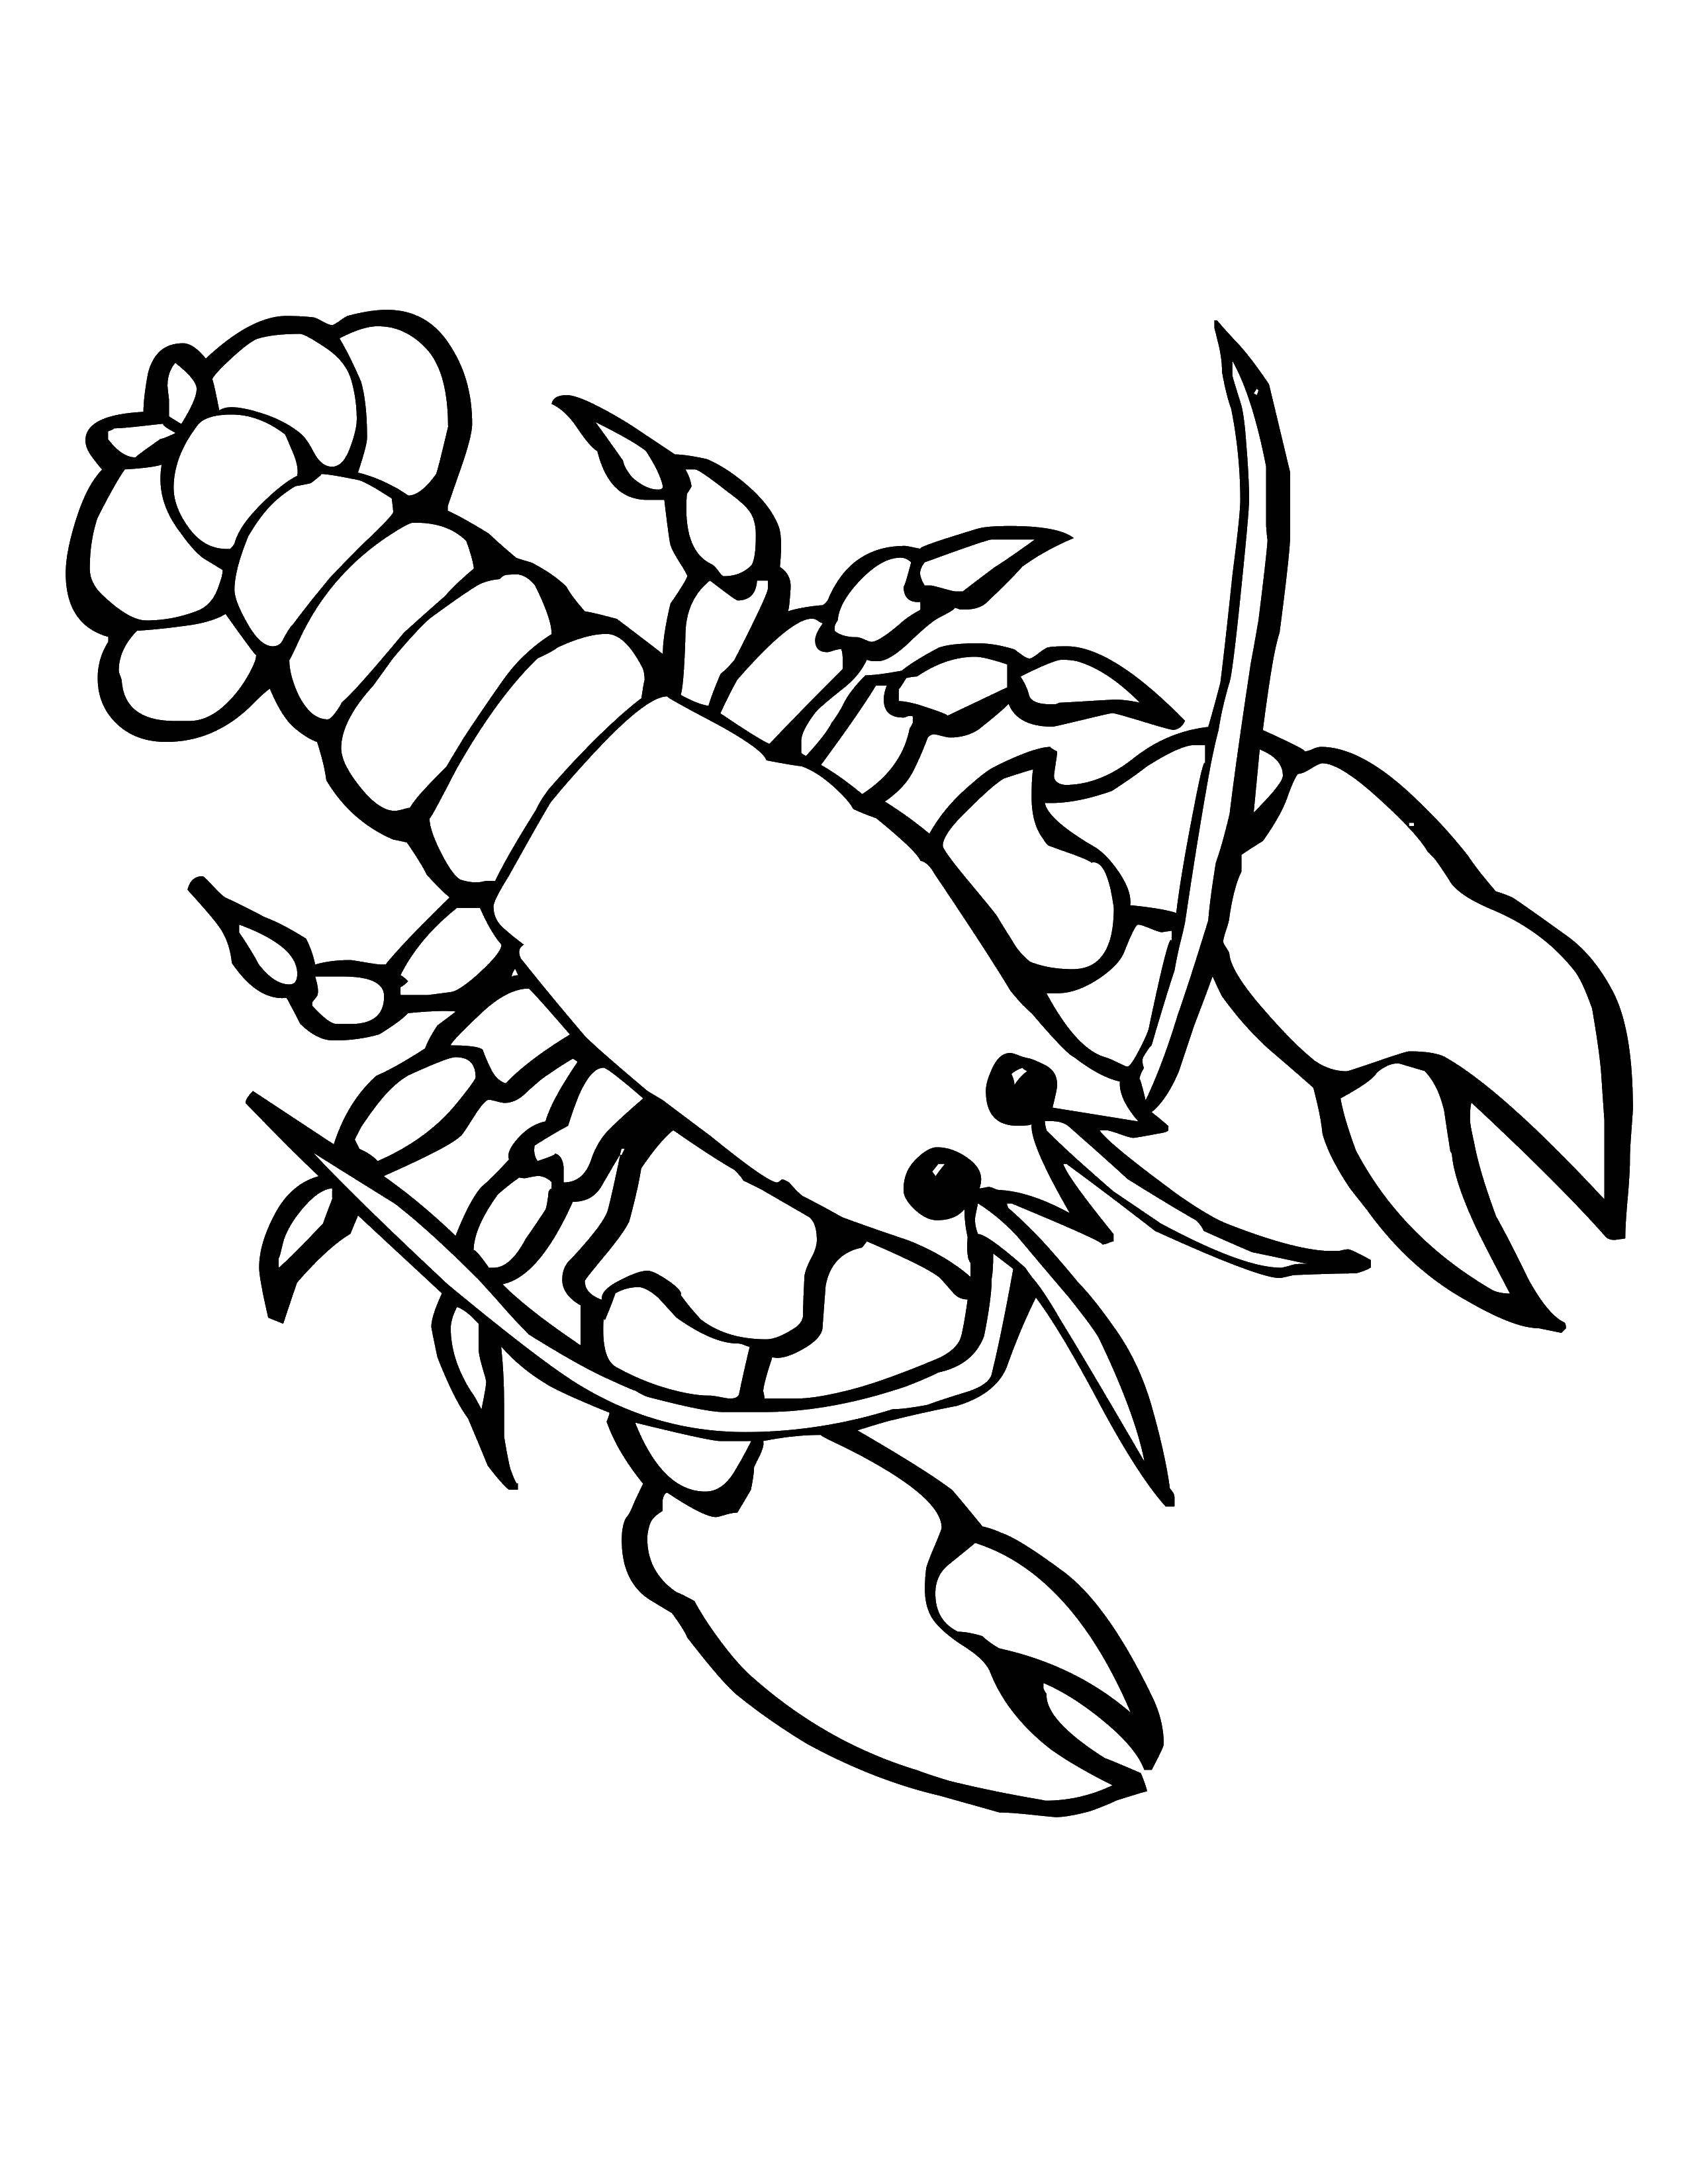 Coloring River crayfish. Category marine. Tags:  Underwater world.